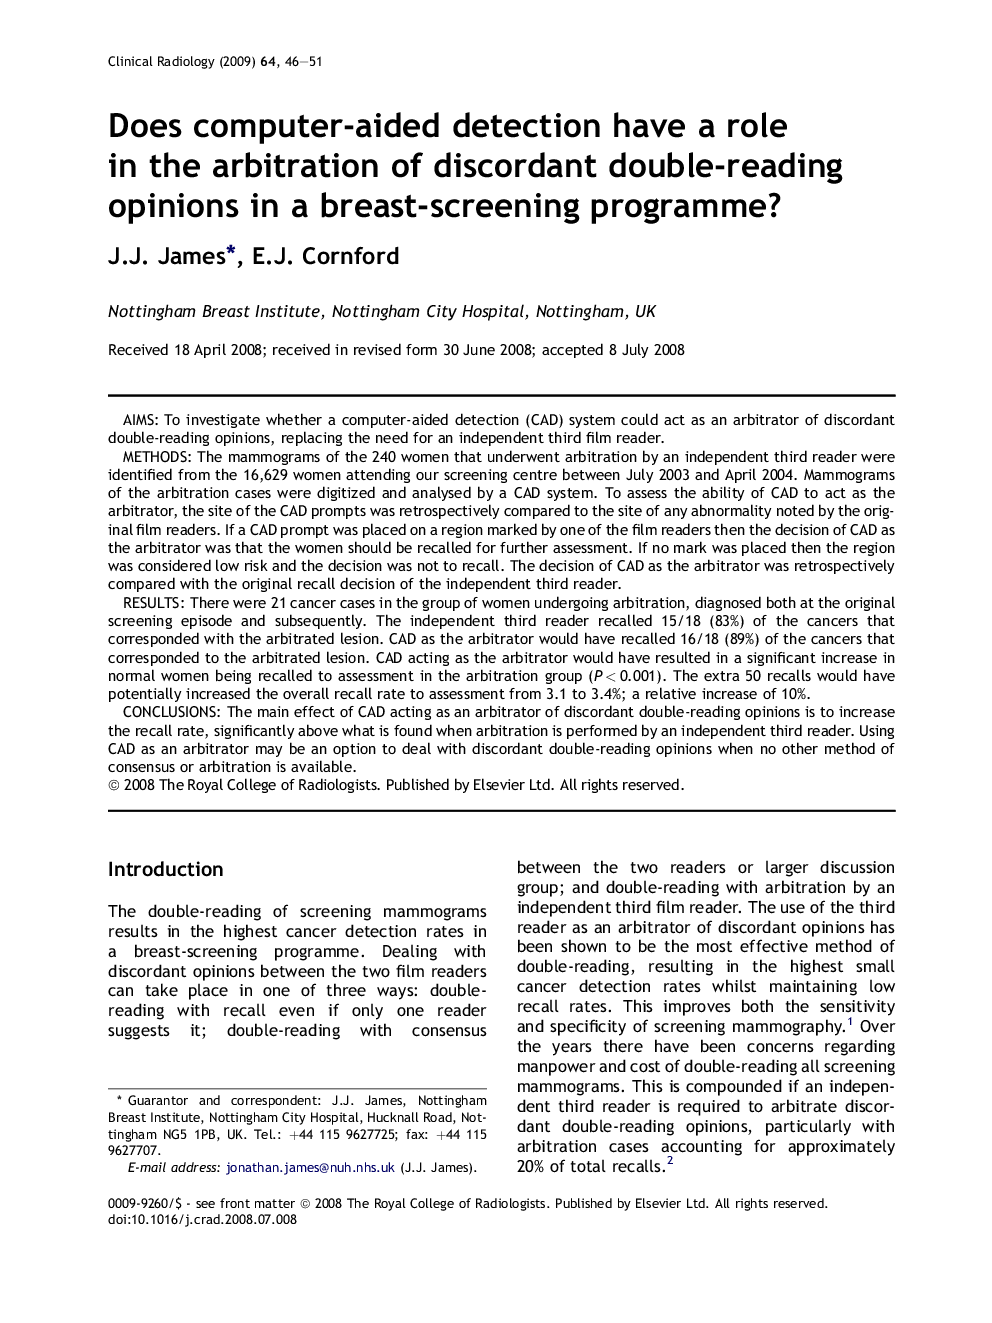 Does computer-aided detection have a role in the arbitration of discordant double-reading opinions in a breast-screening programme?